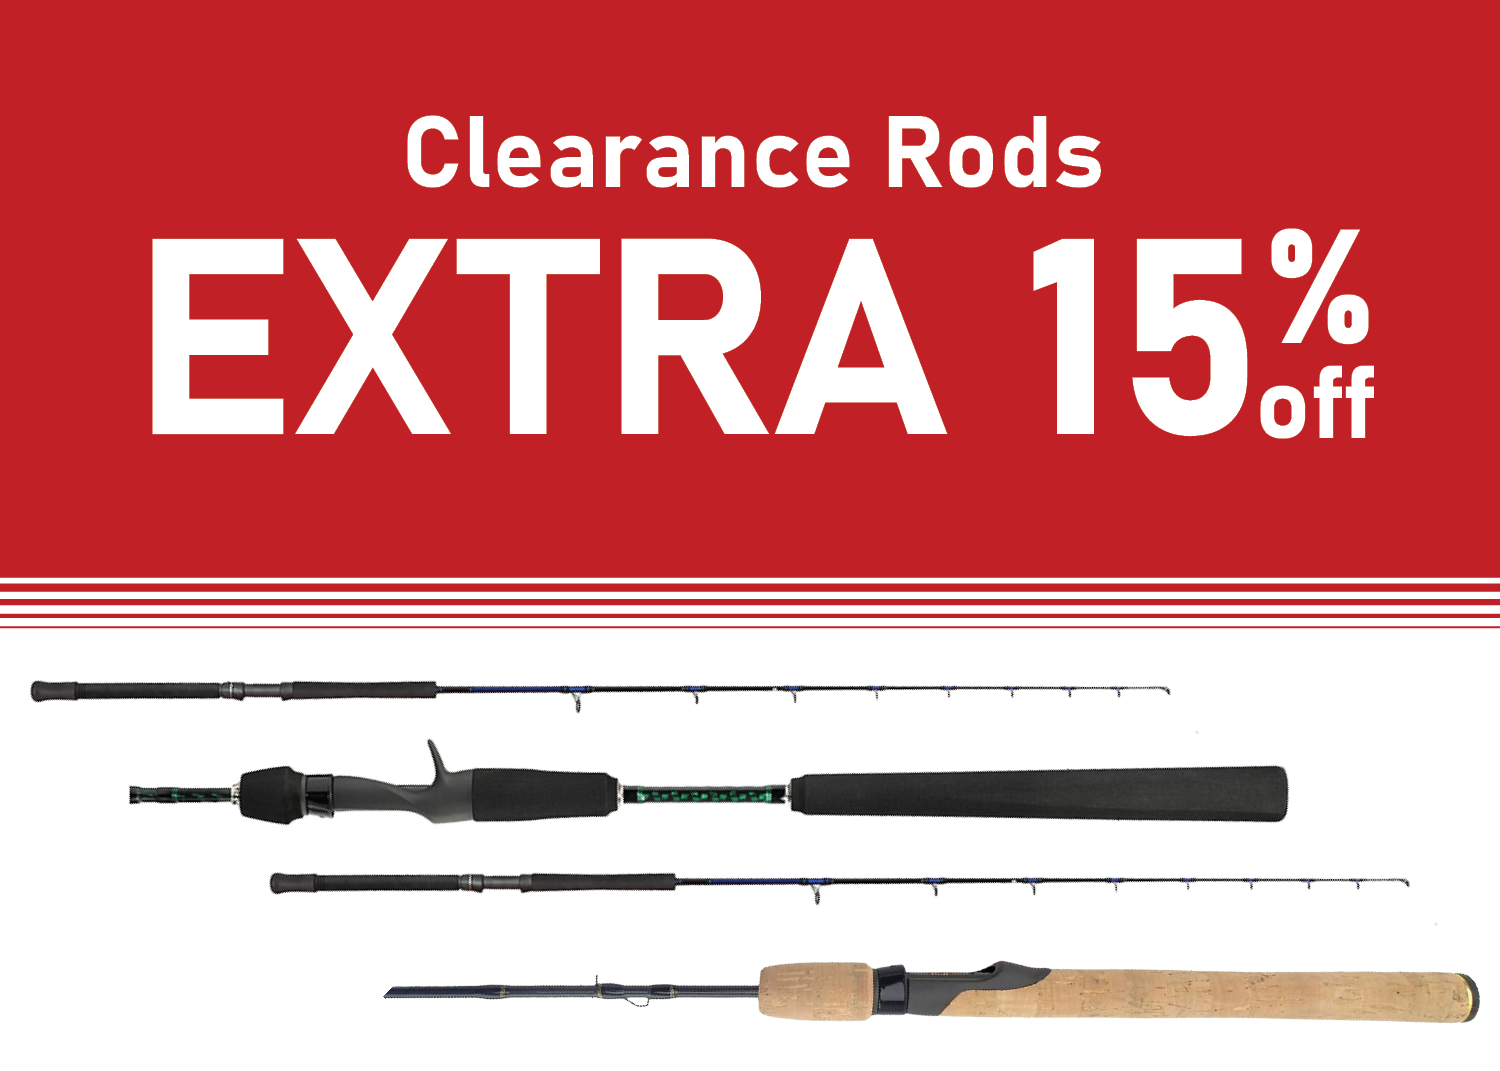 Save an EXTRA 15% on Clearance Rods